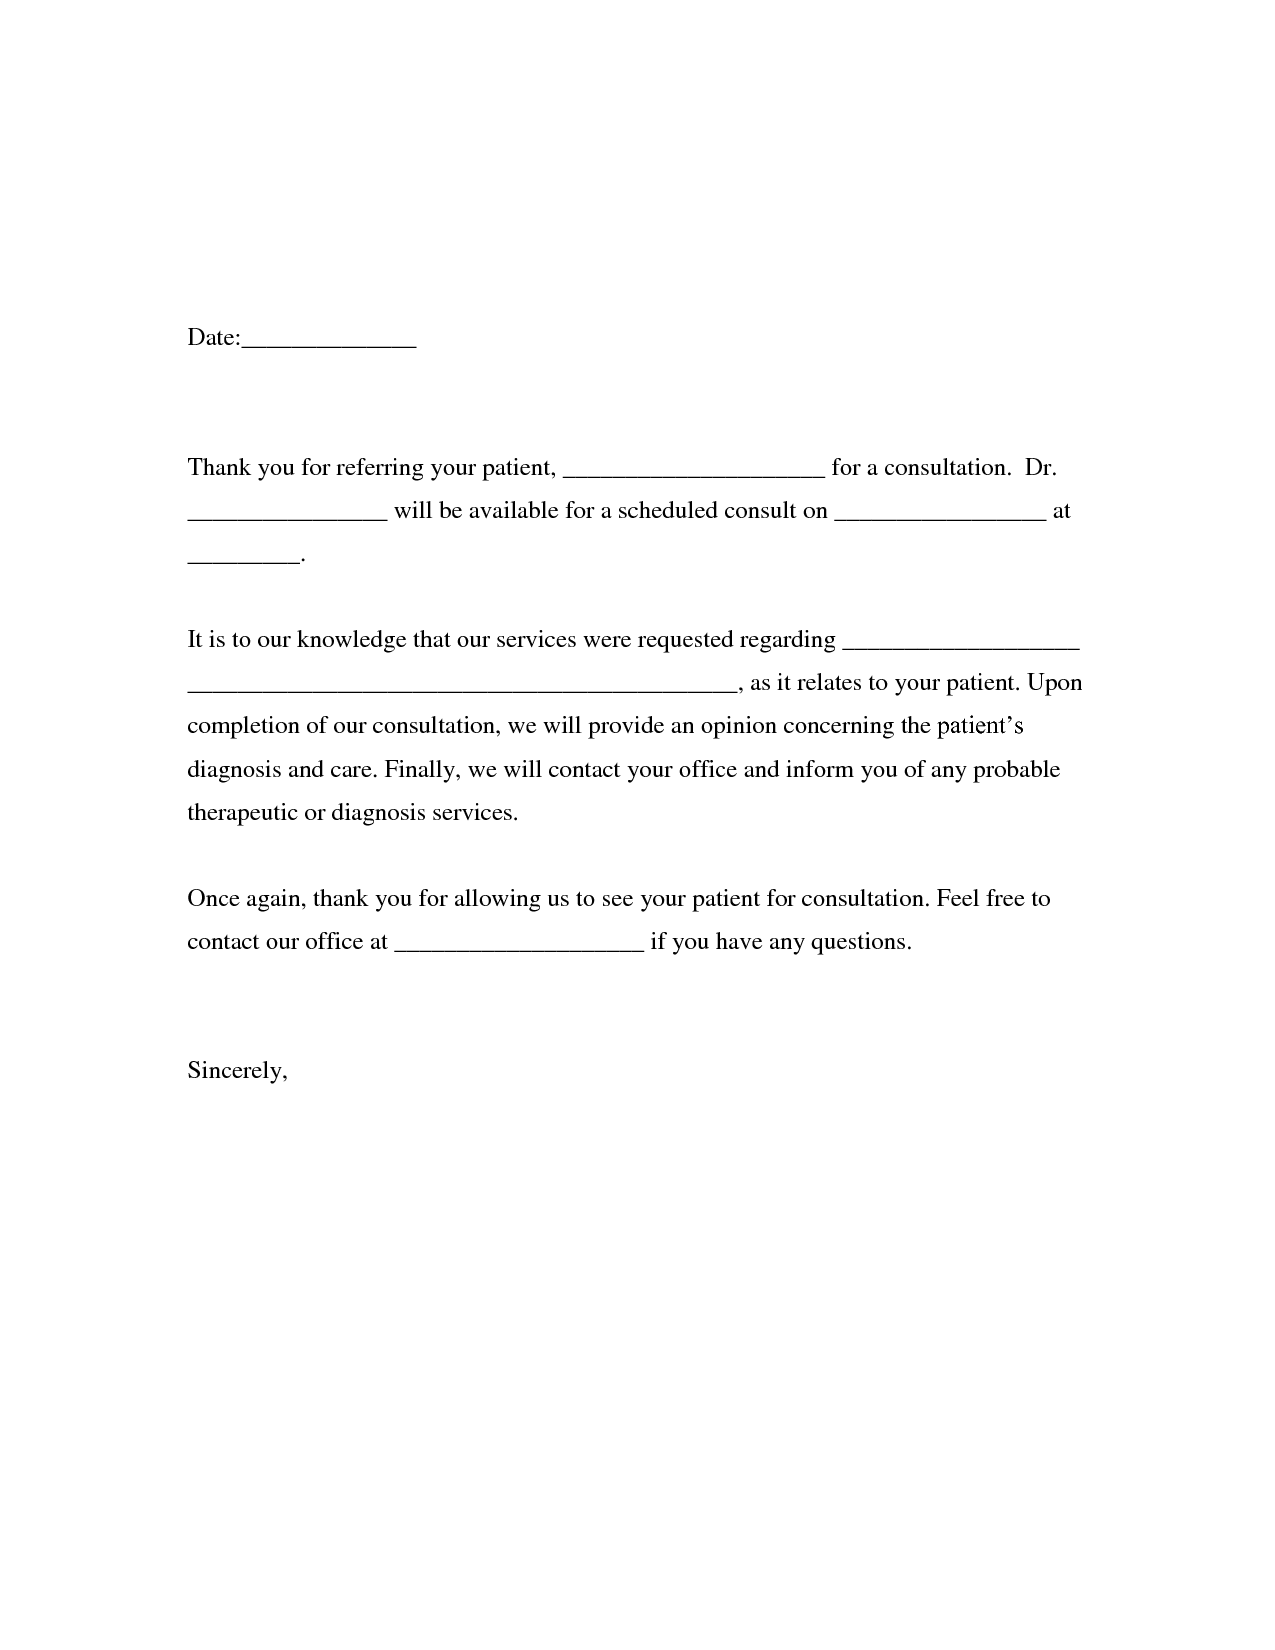 Client Referral Thank You Letter Gallery Letter Format Formal Sample